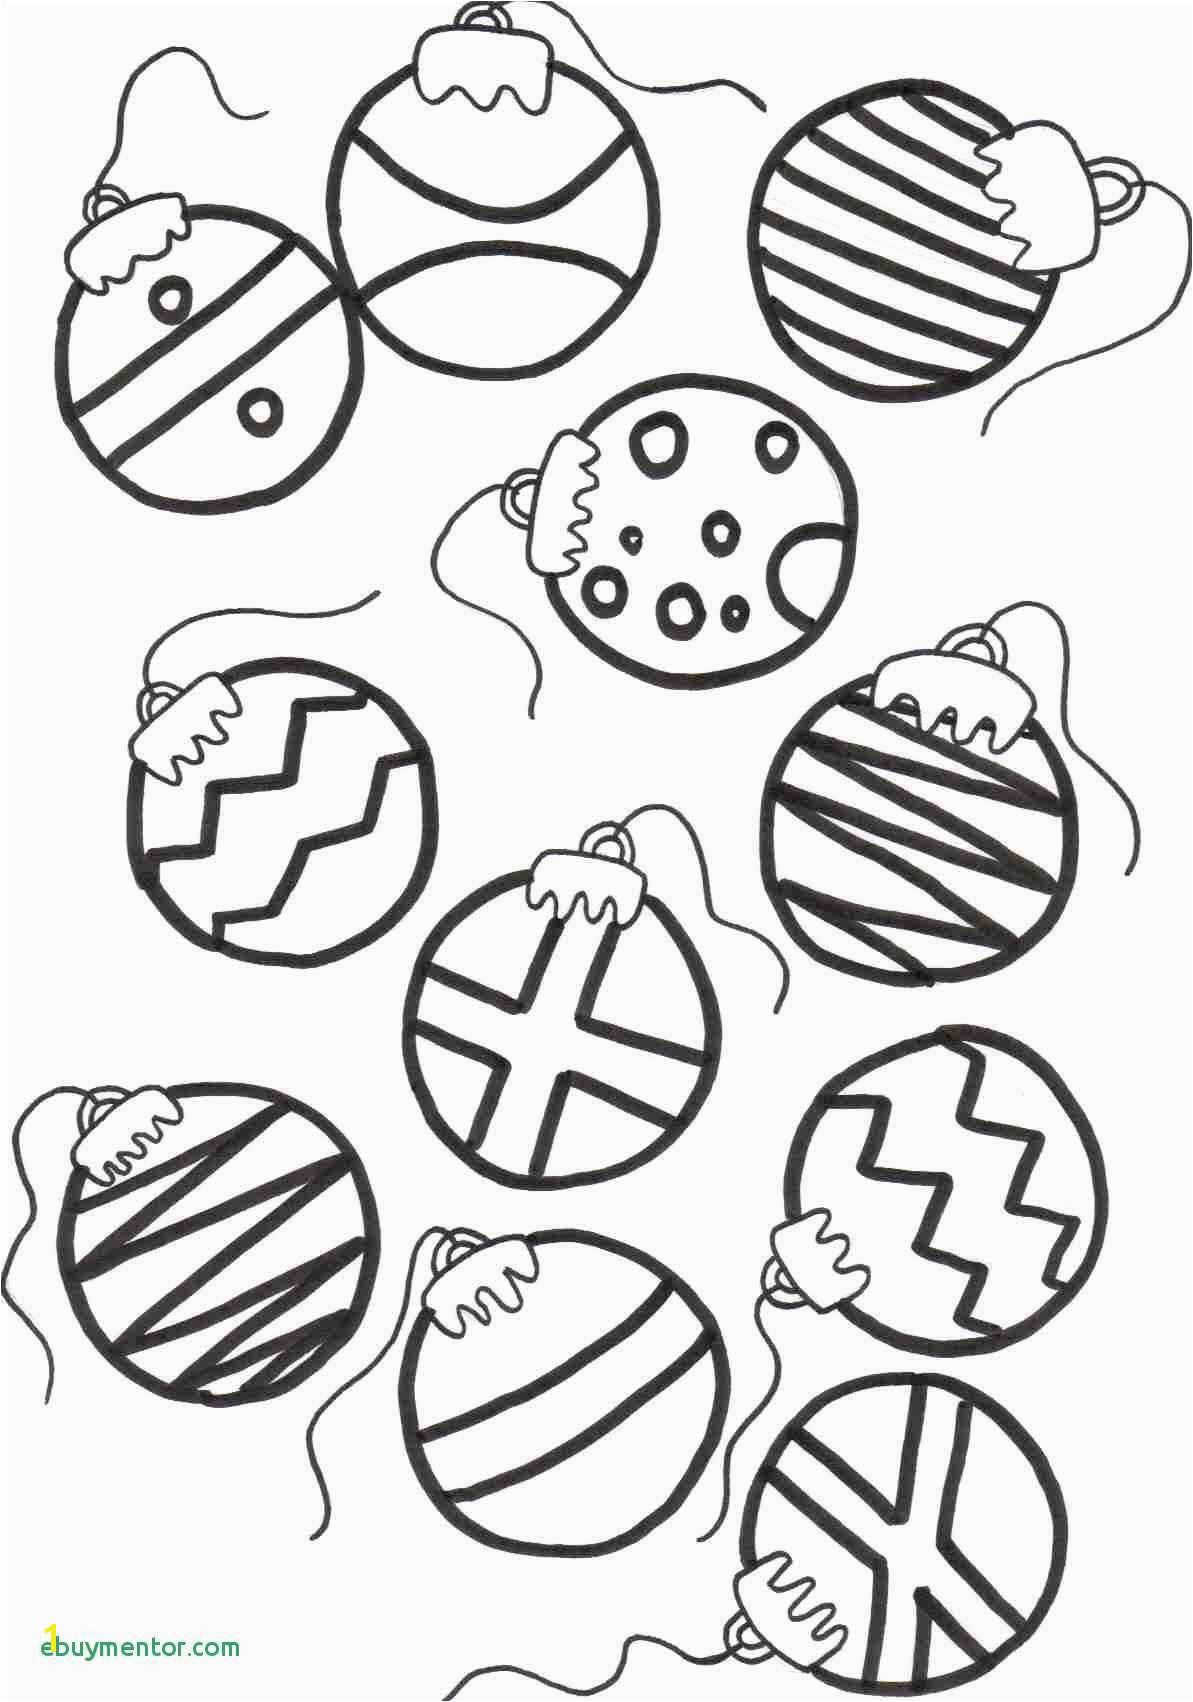 Christmas ornament Coloring Pages New Coloring Pages Christmas Wreaths Katesgrove